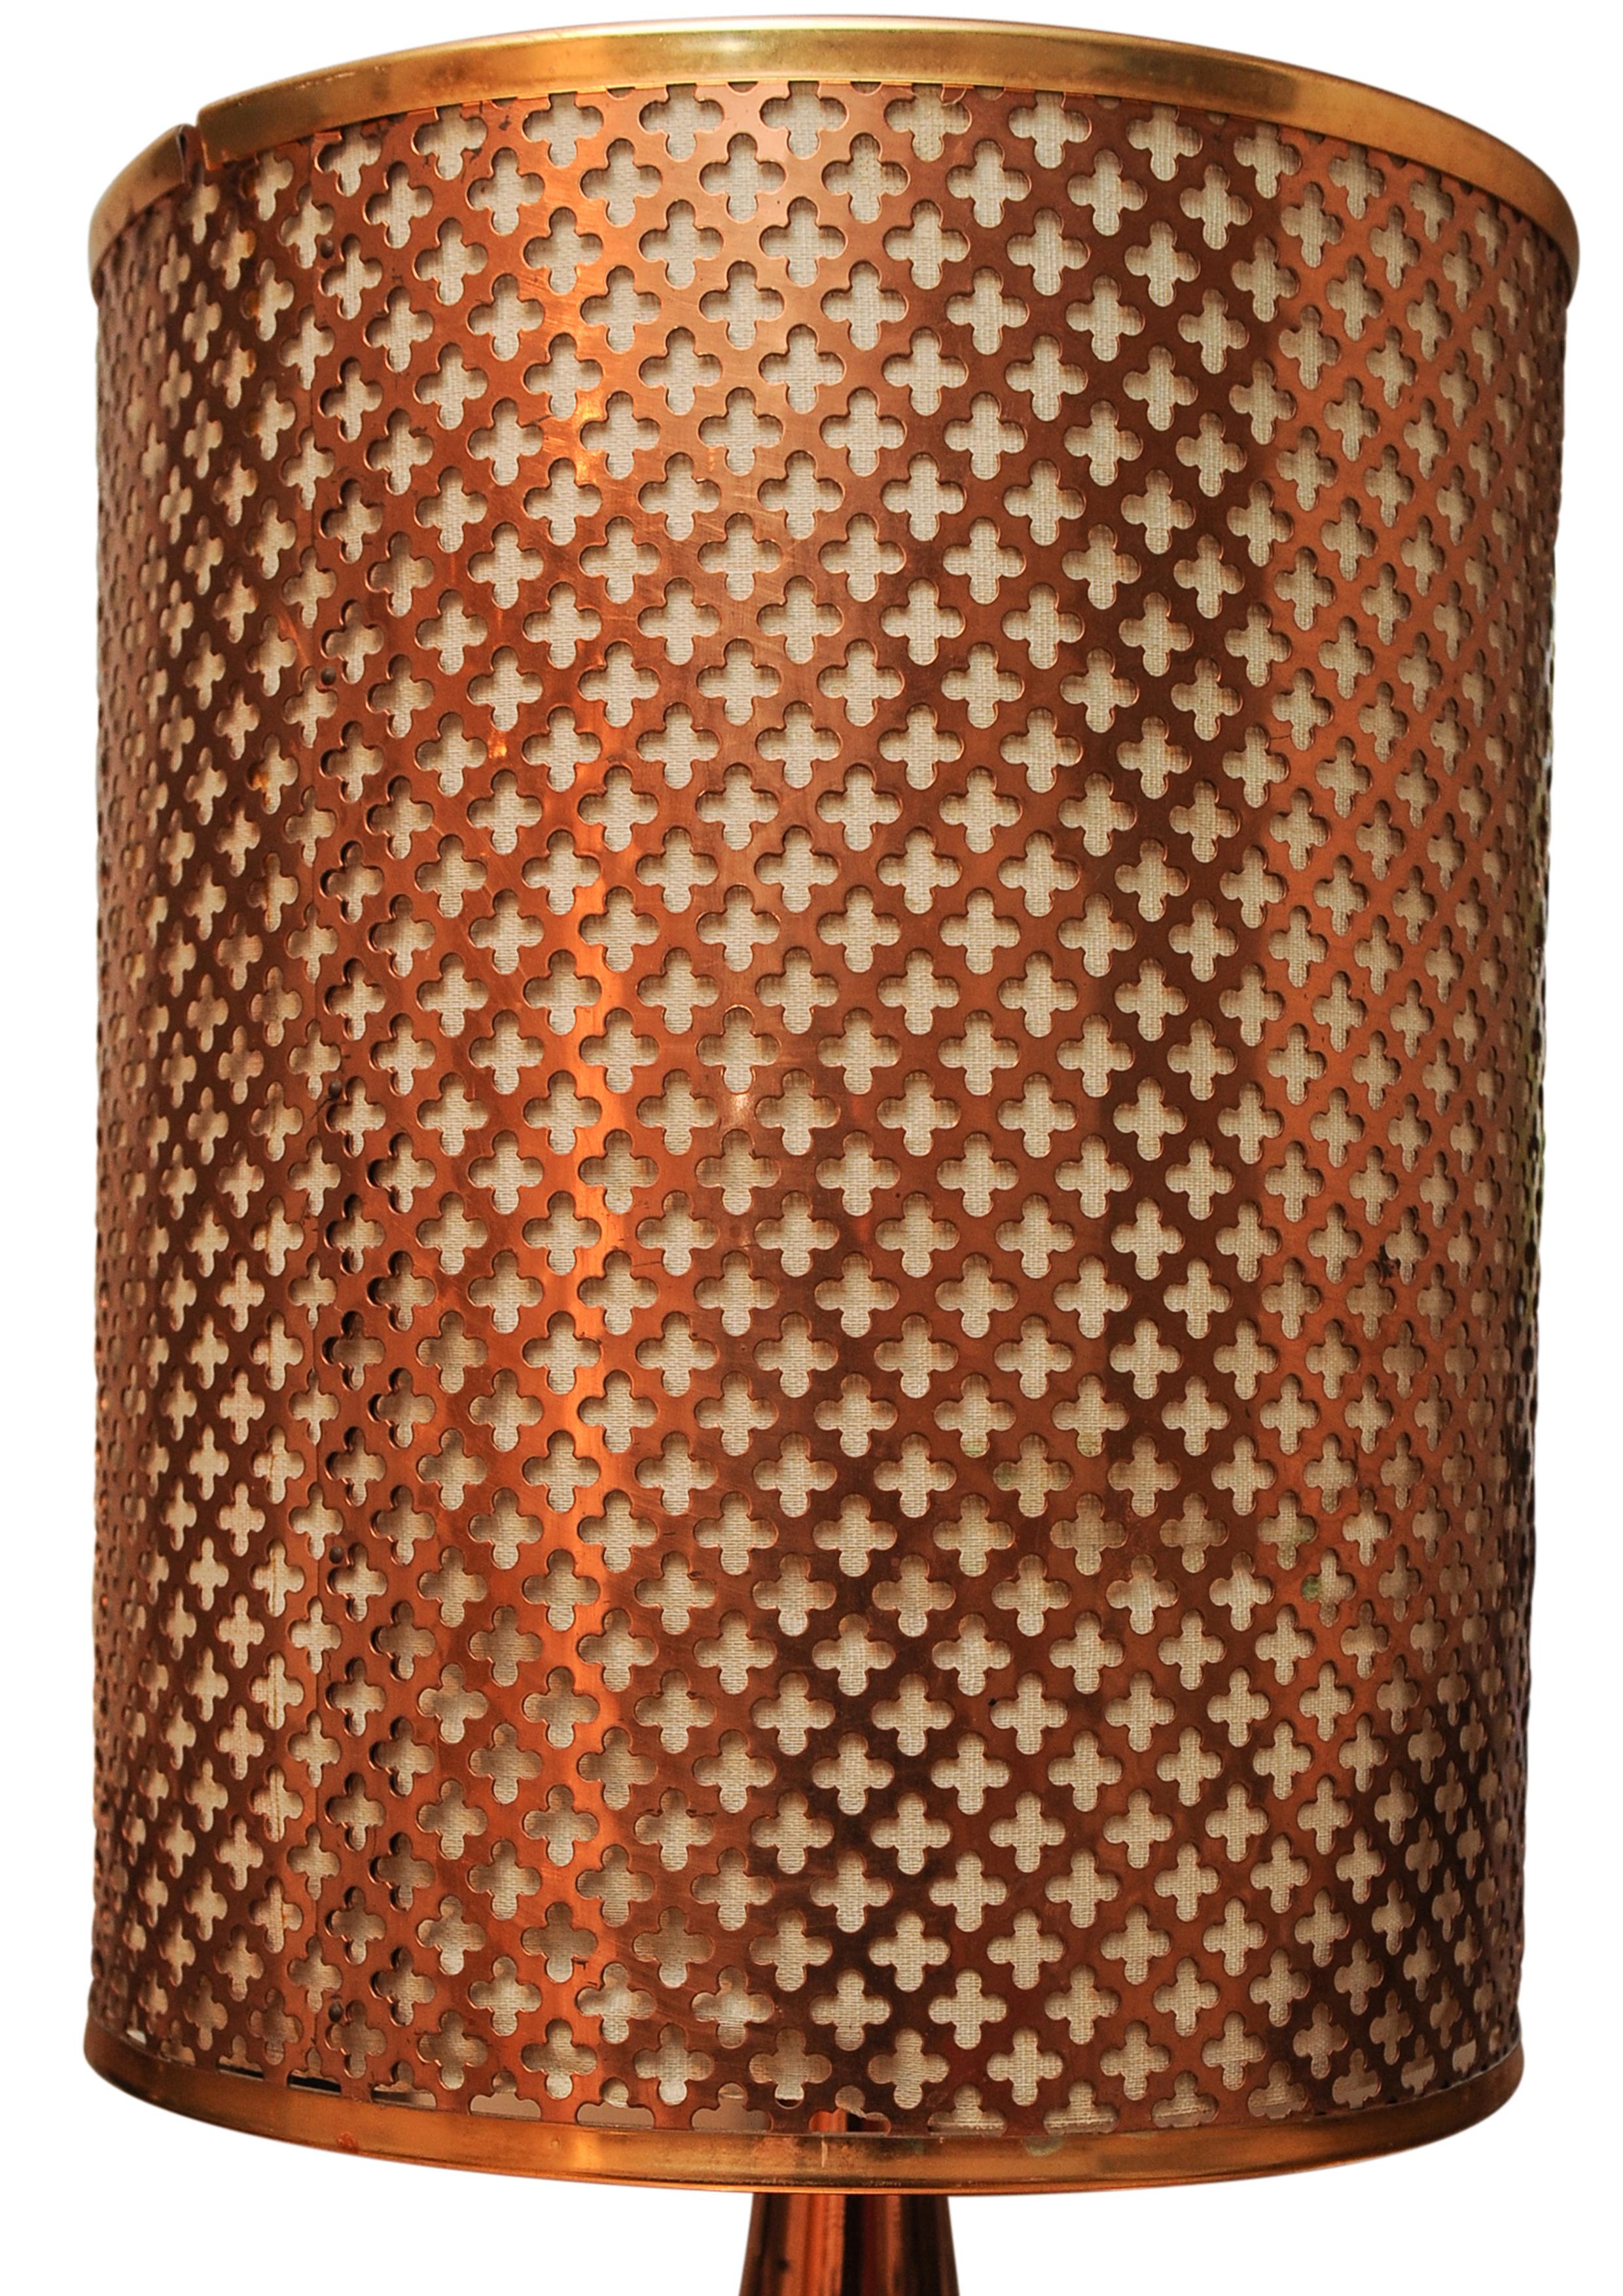 Moorish A Mid Century Zambian Copper Table Lamp With An Alhambra Design To Light Shade For Sale